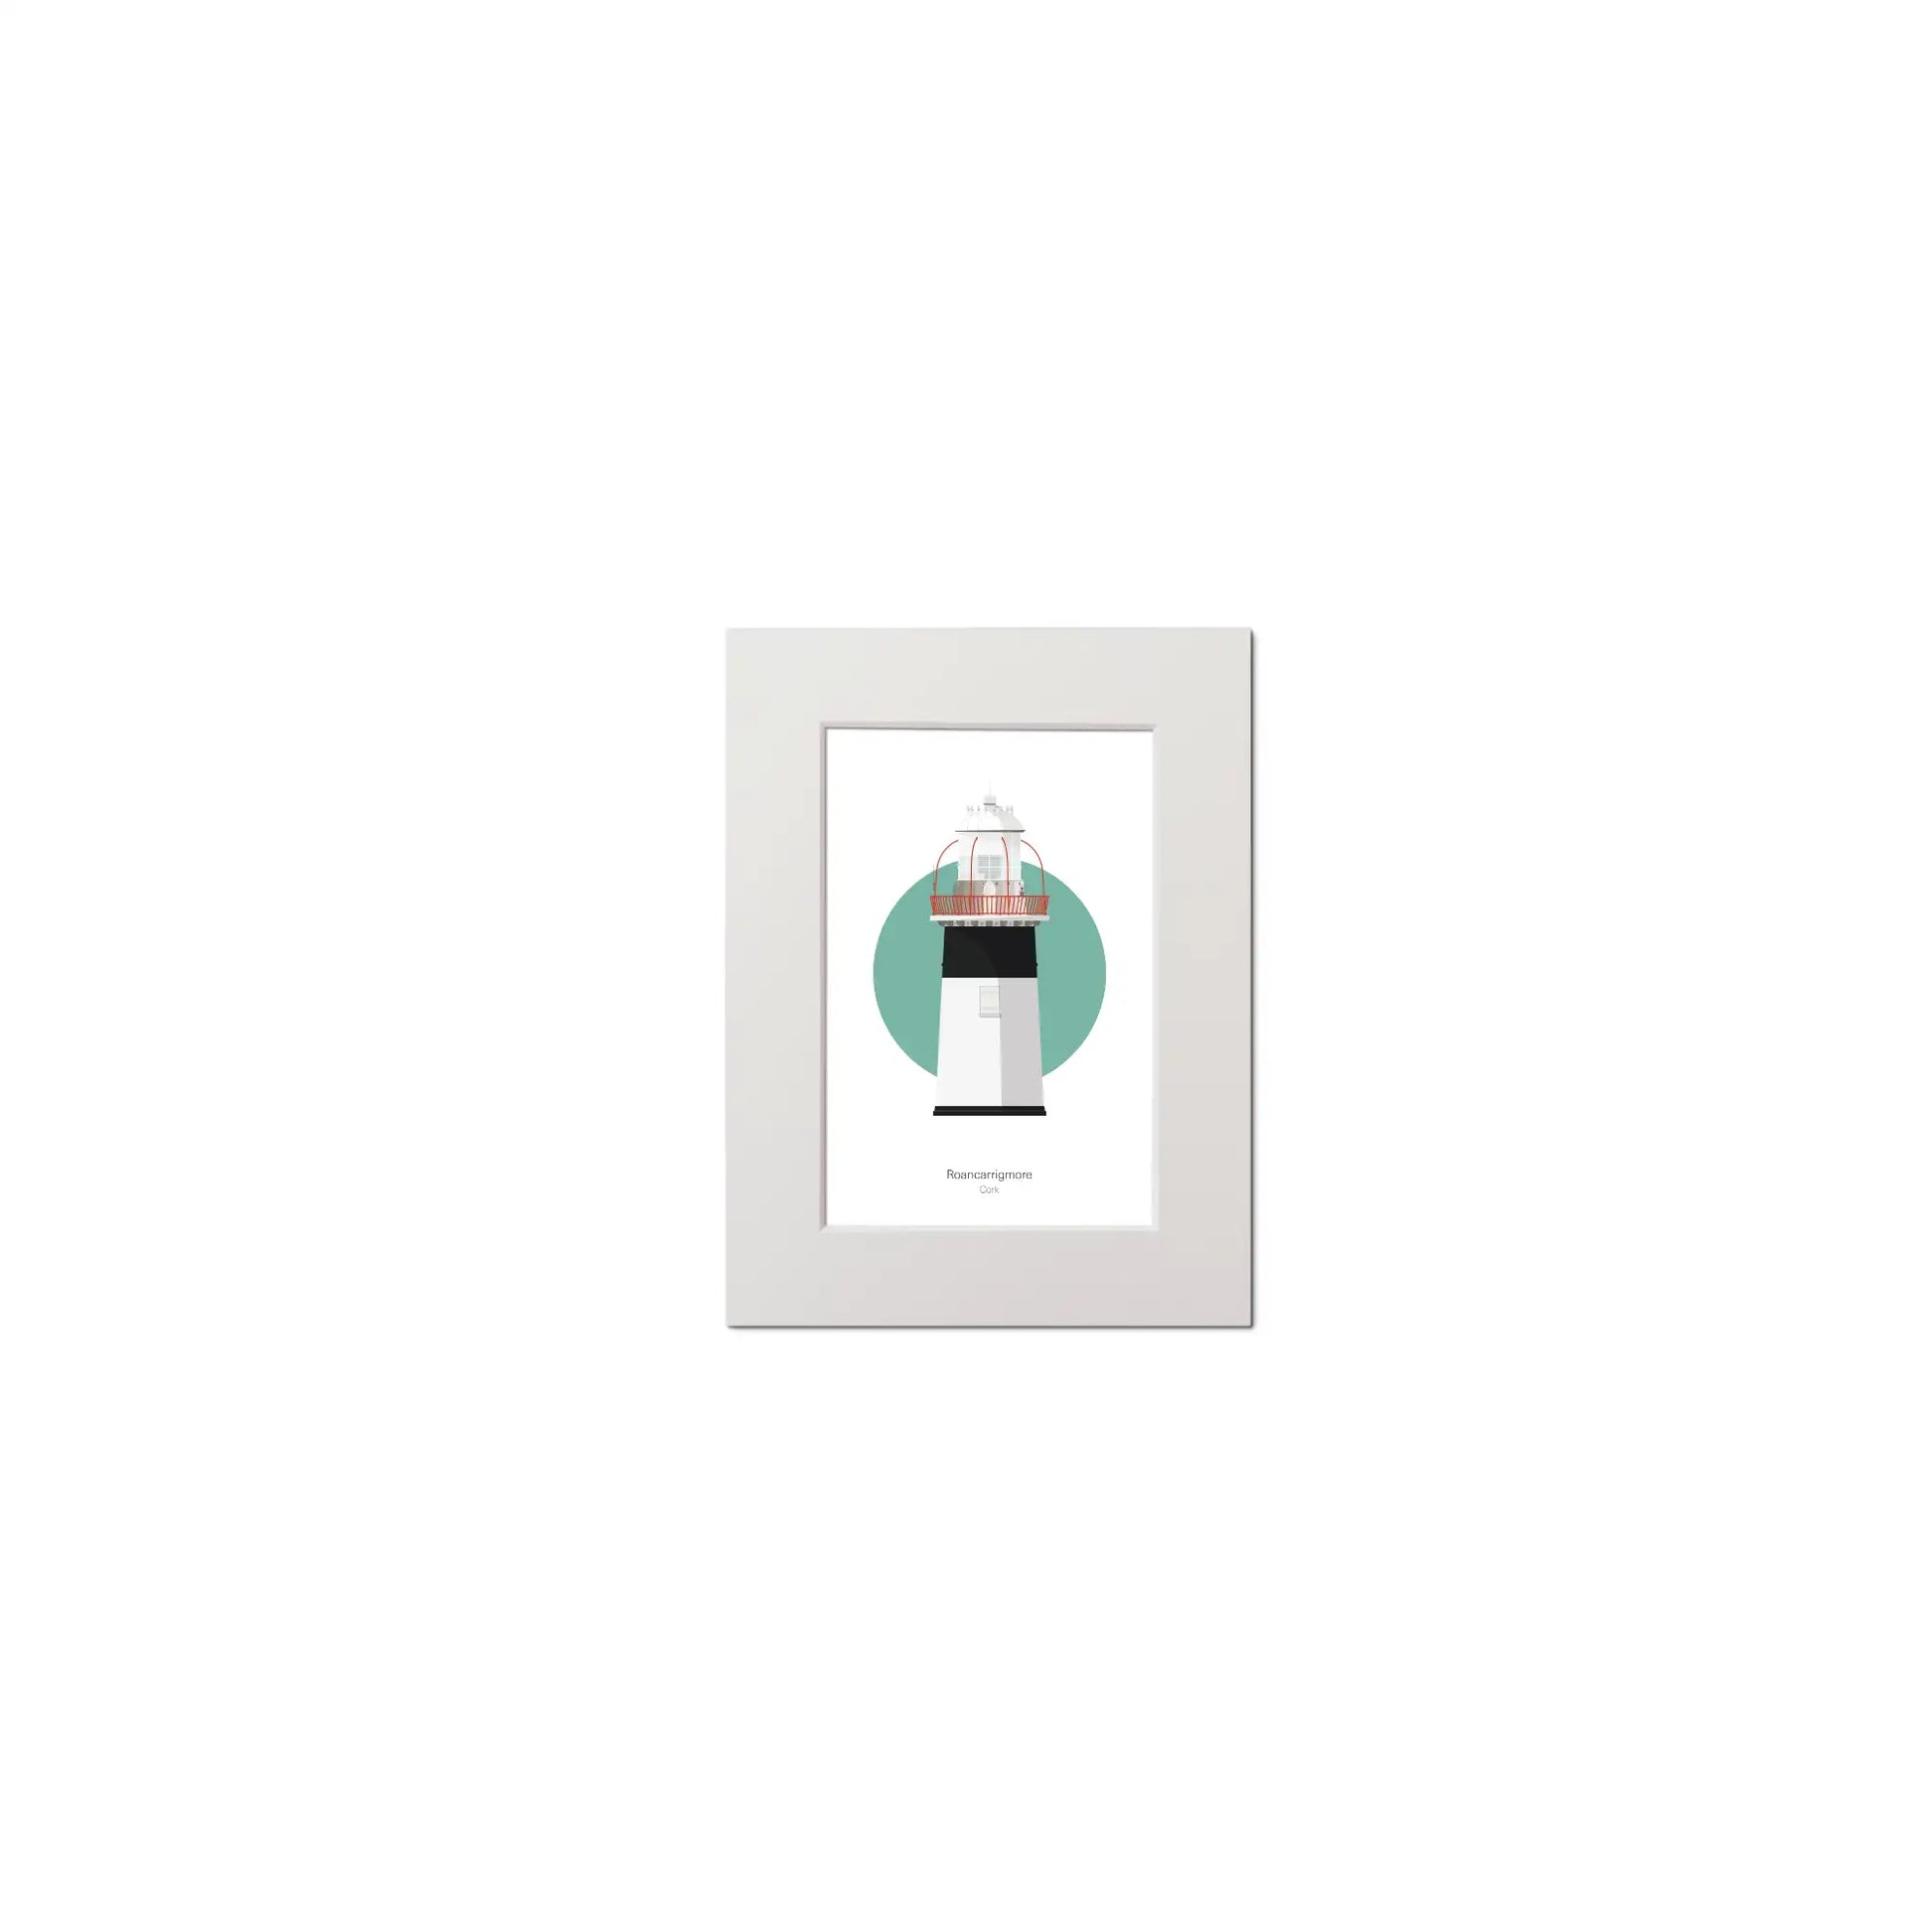 Illustration of Roancarrigmore lighthouse on a white background inside light blue square, mounted and measuring 15x20cm.